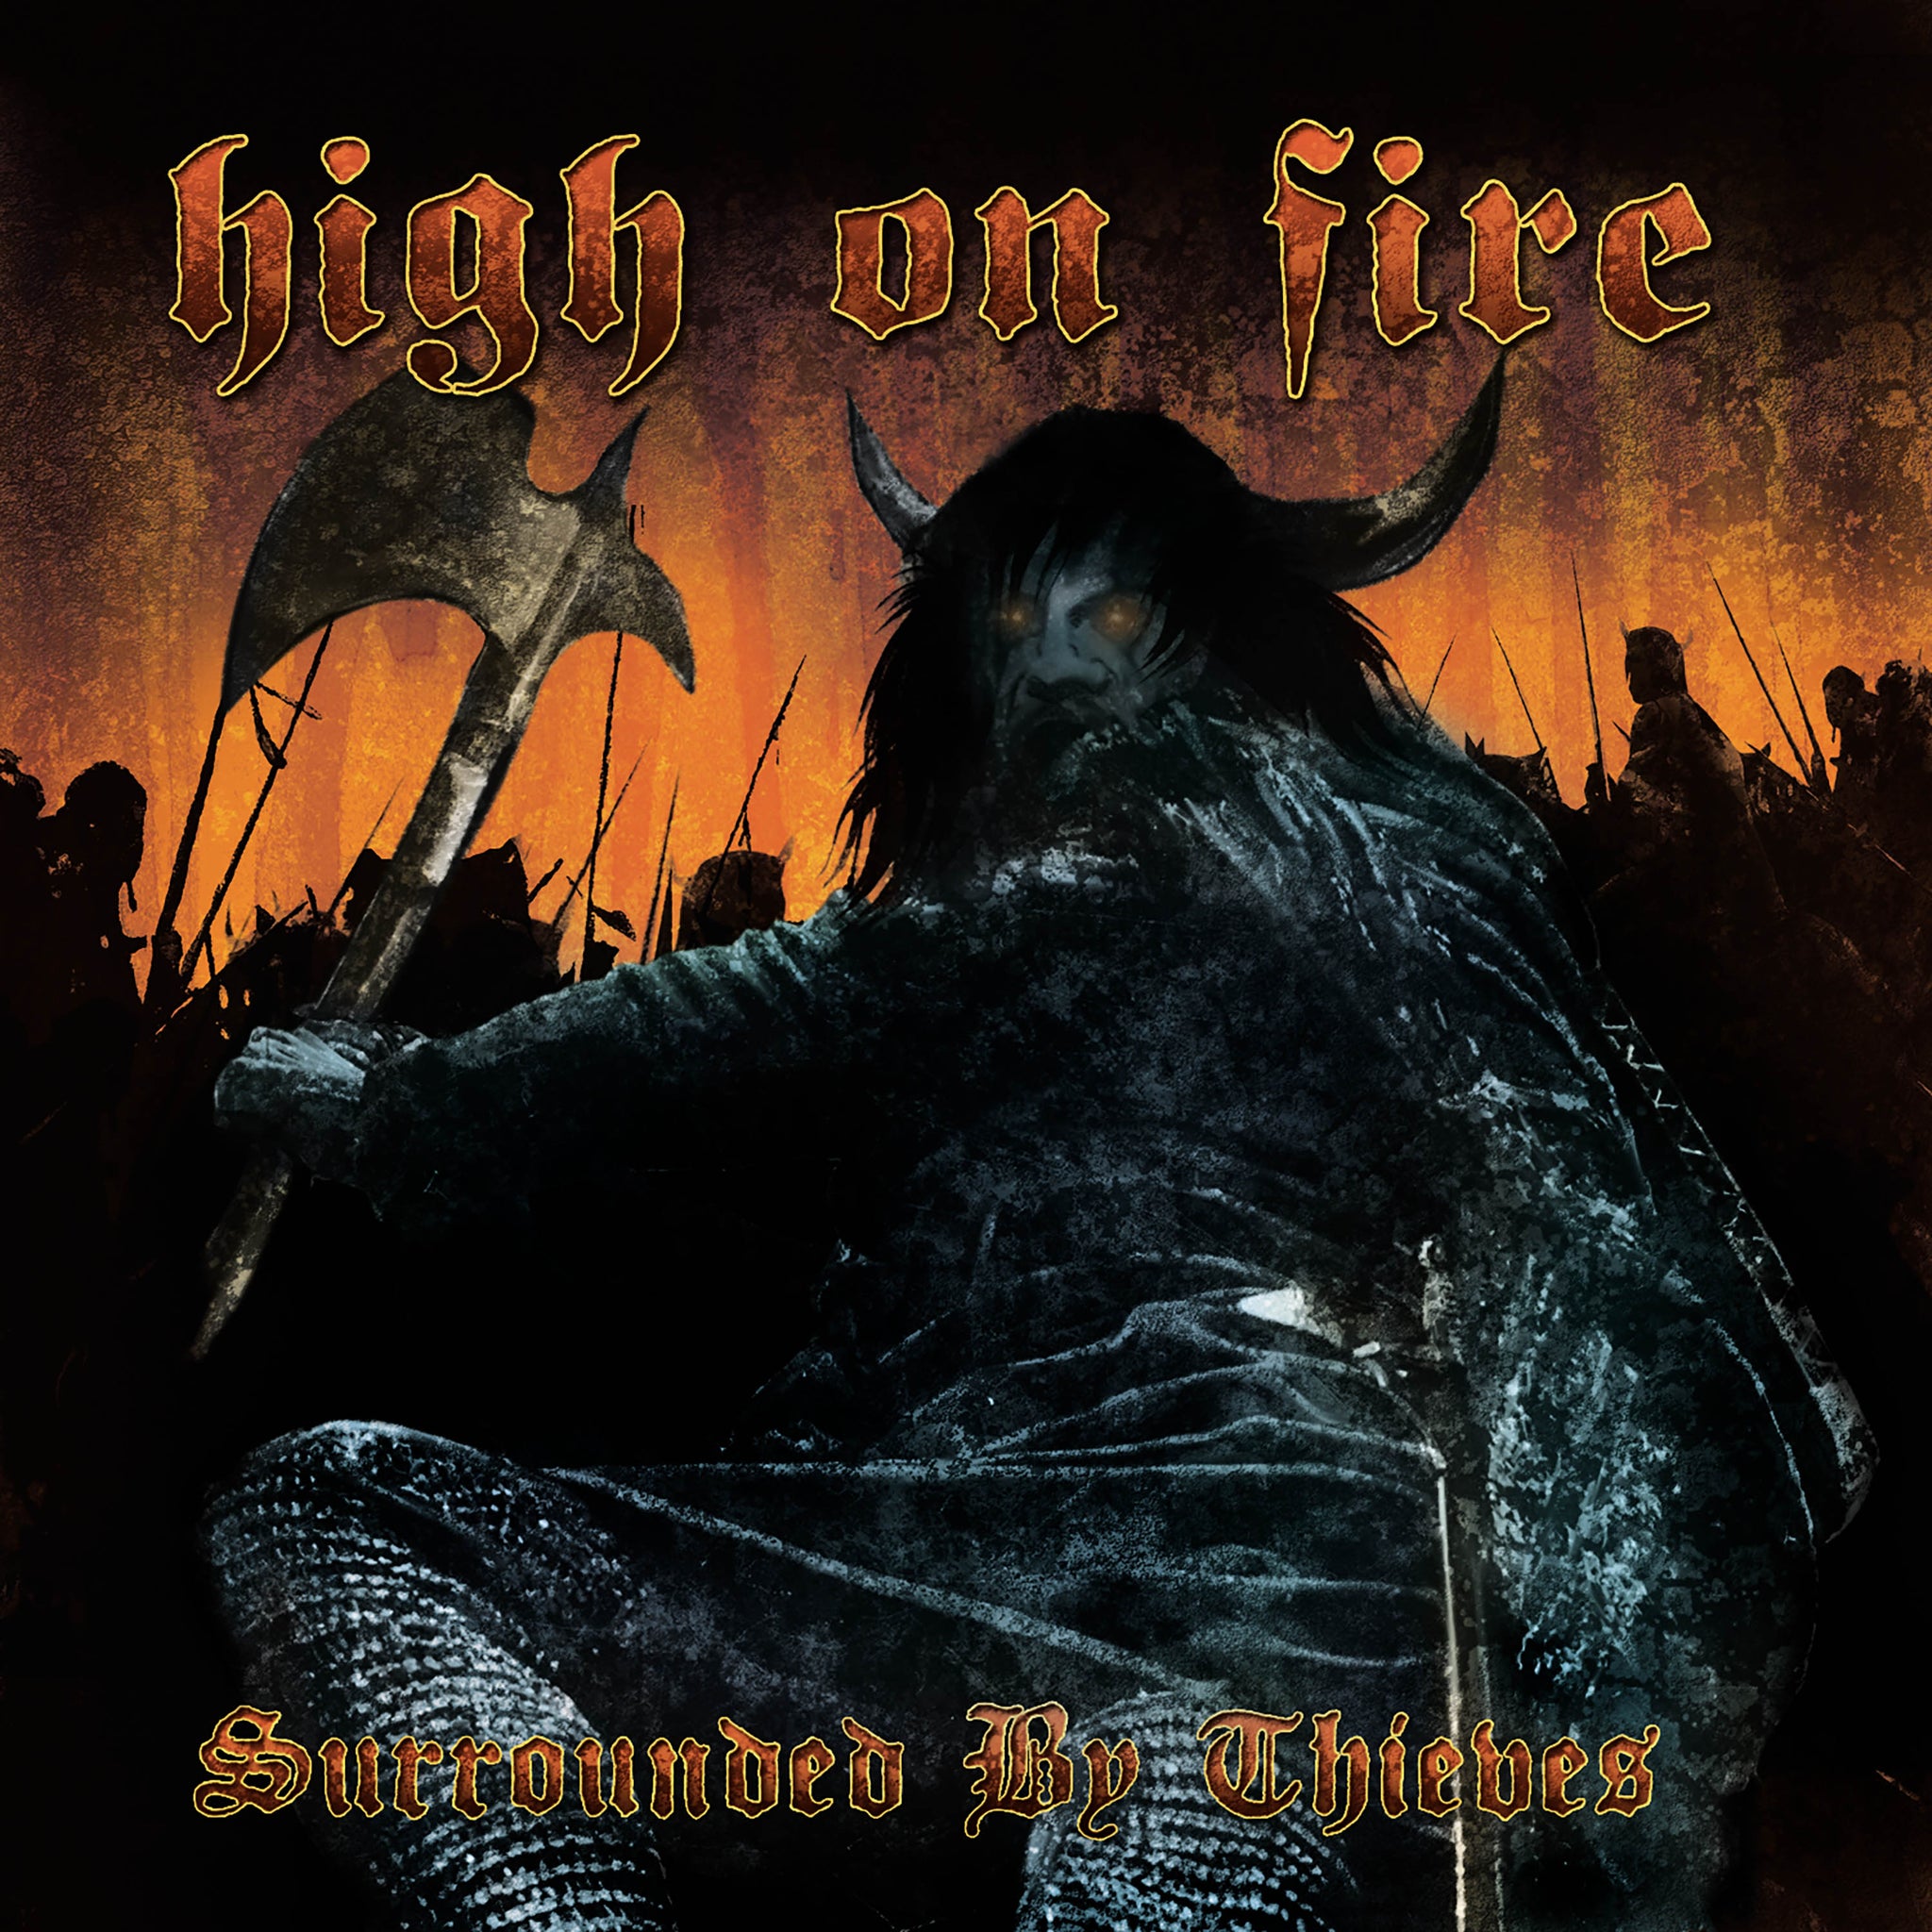 High on Fire "Surrounded By Thieves" 2xLP